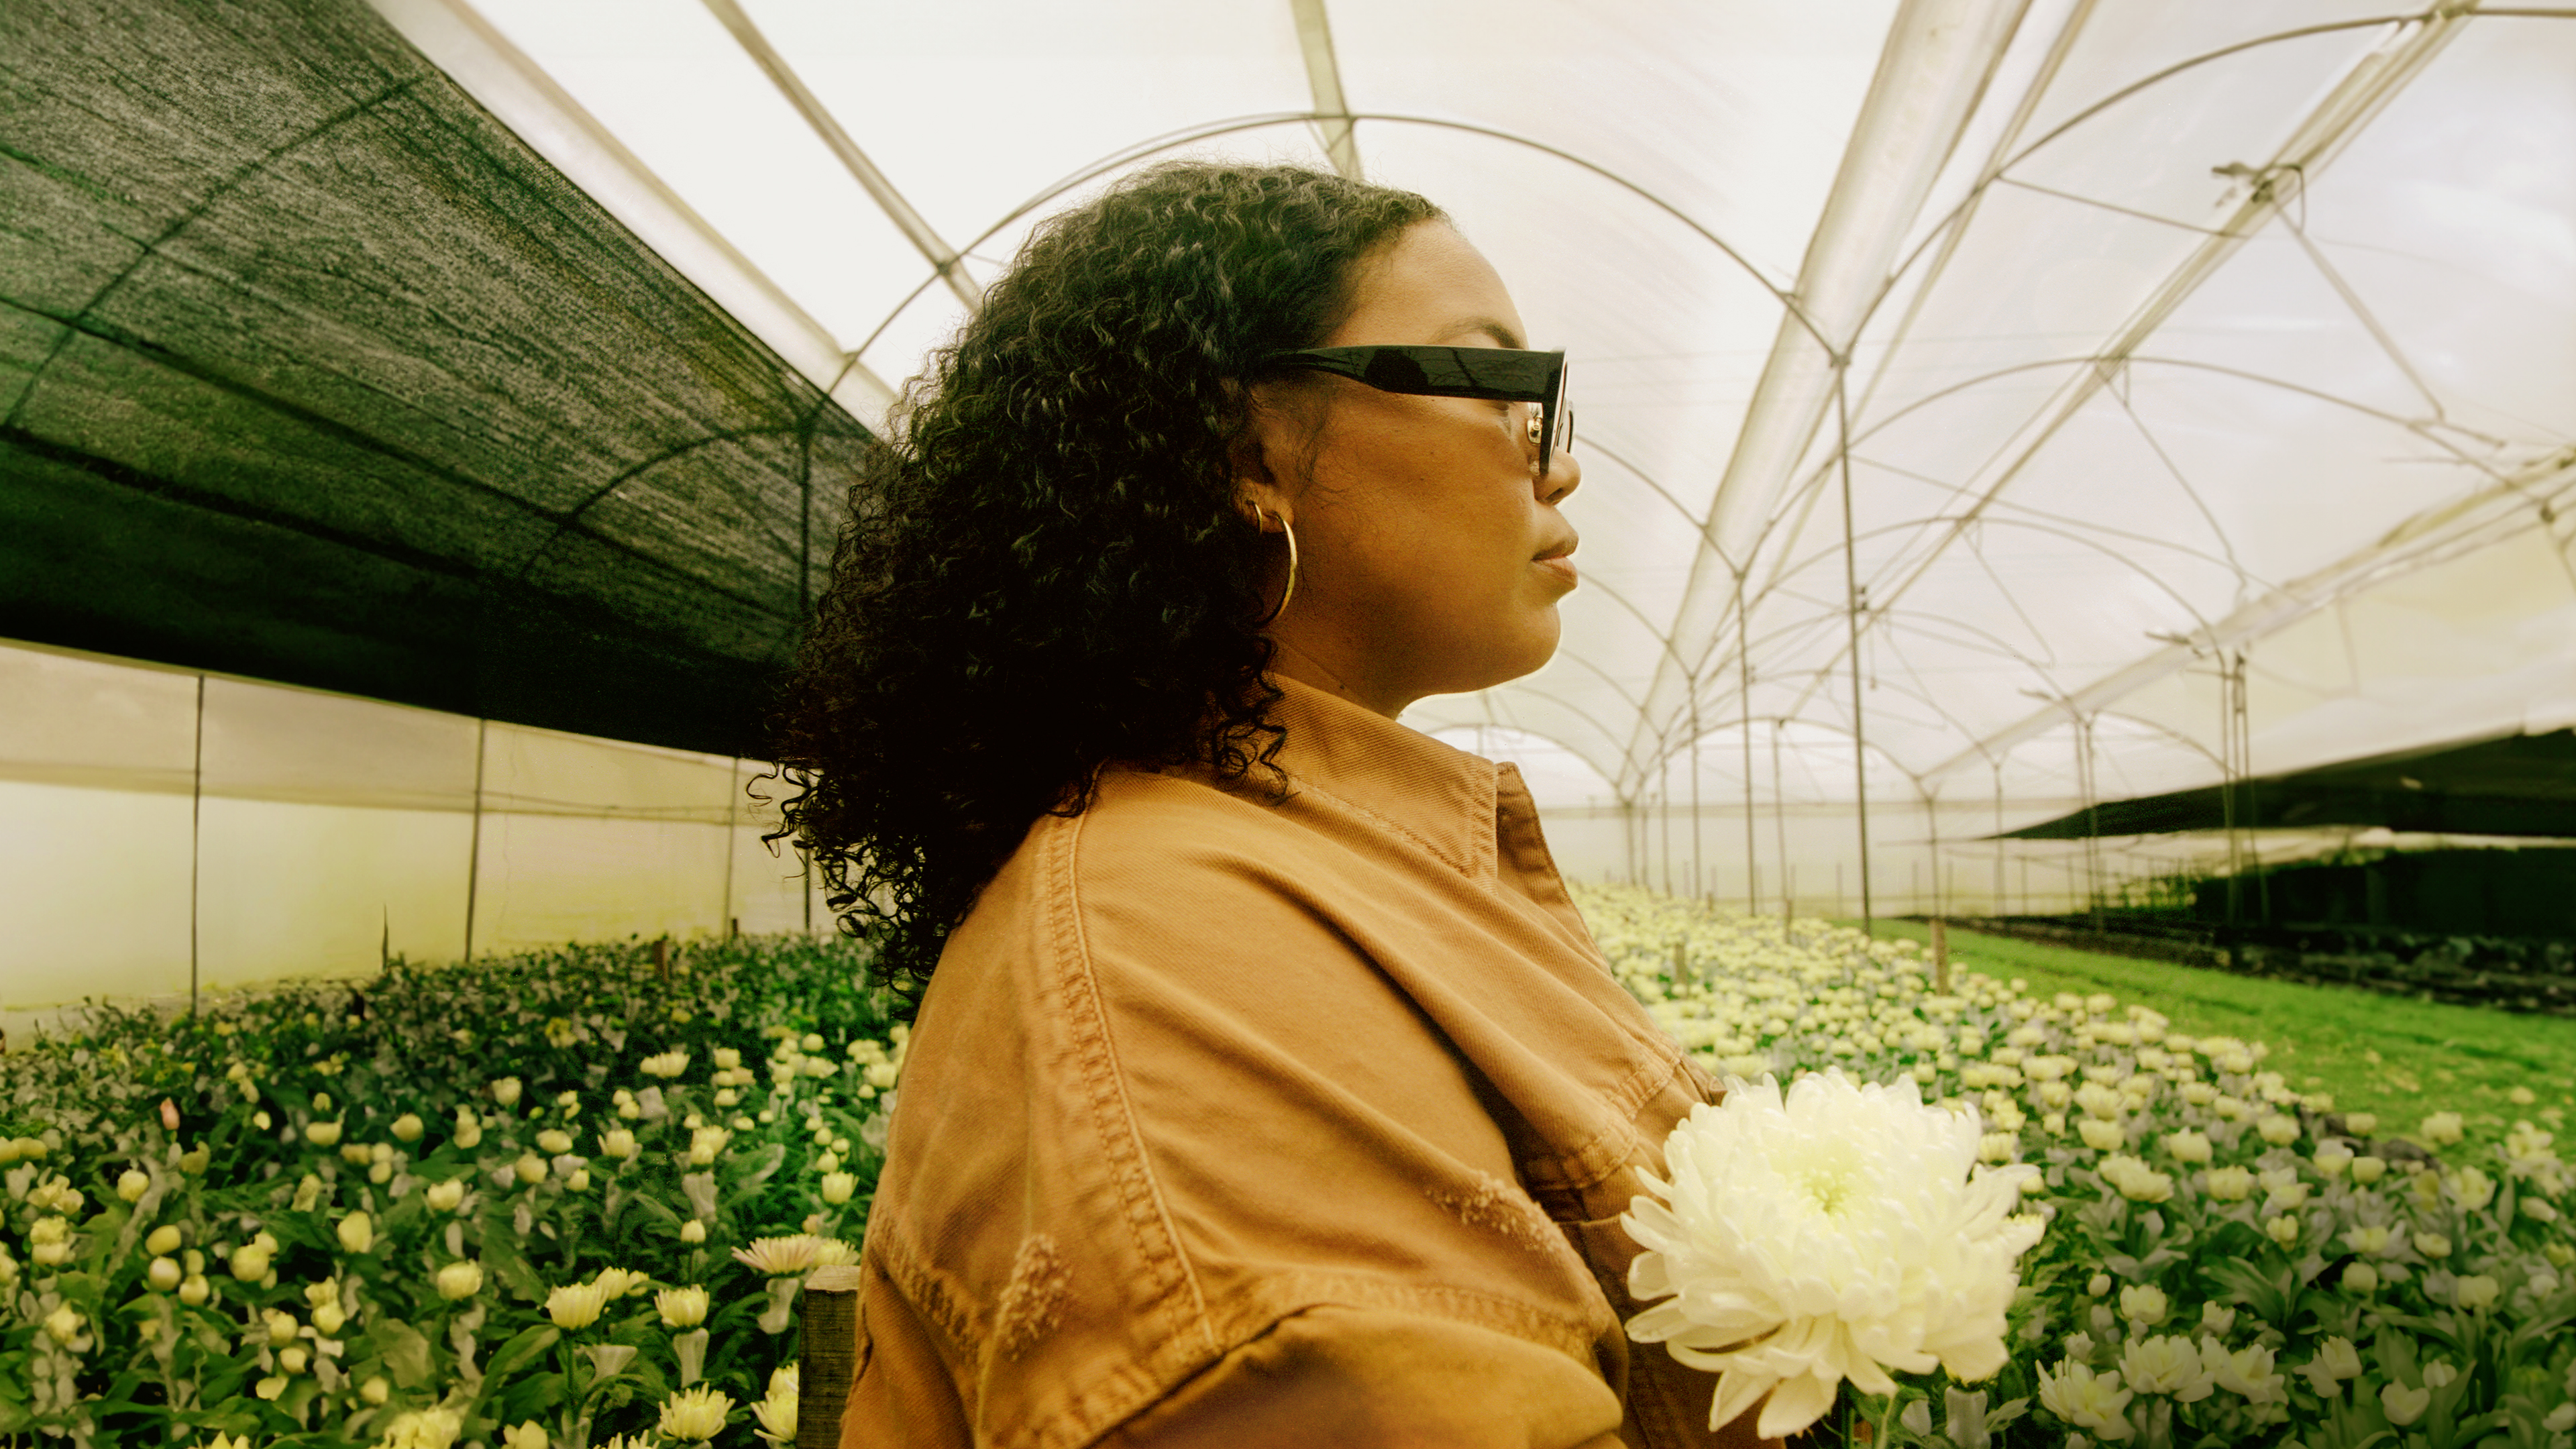 A woman wearing glasses stands in profile, holding a flower in a greenhouse filled with white flowers